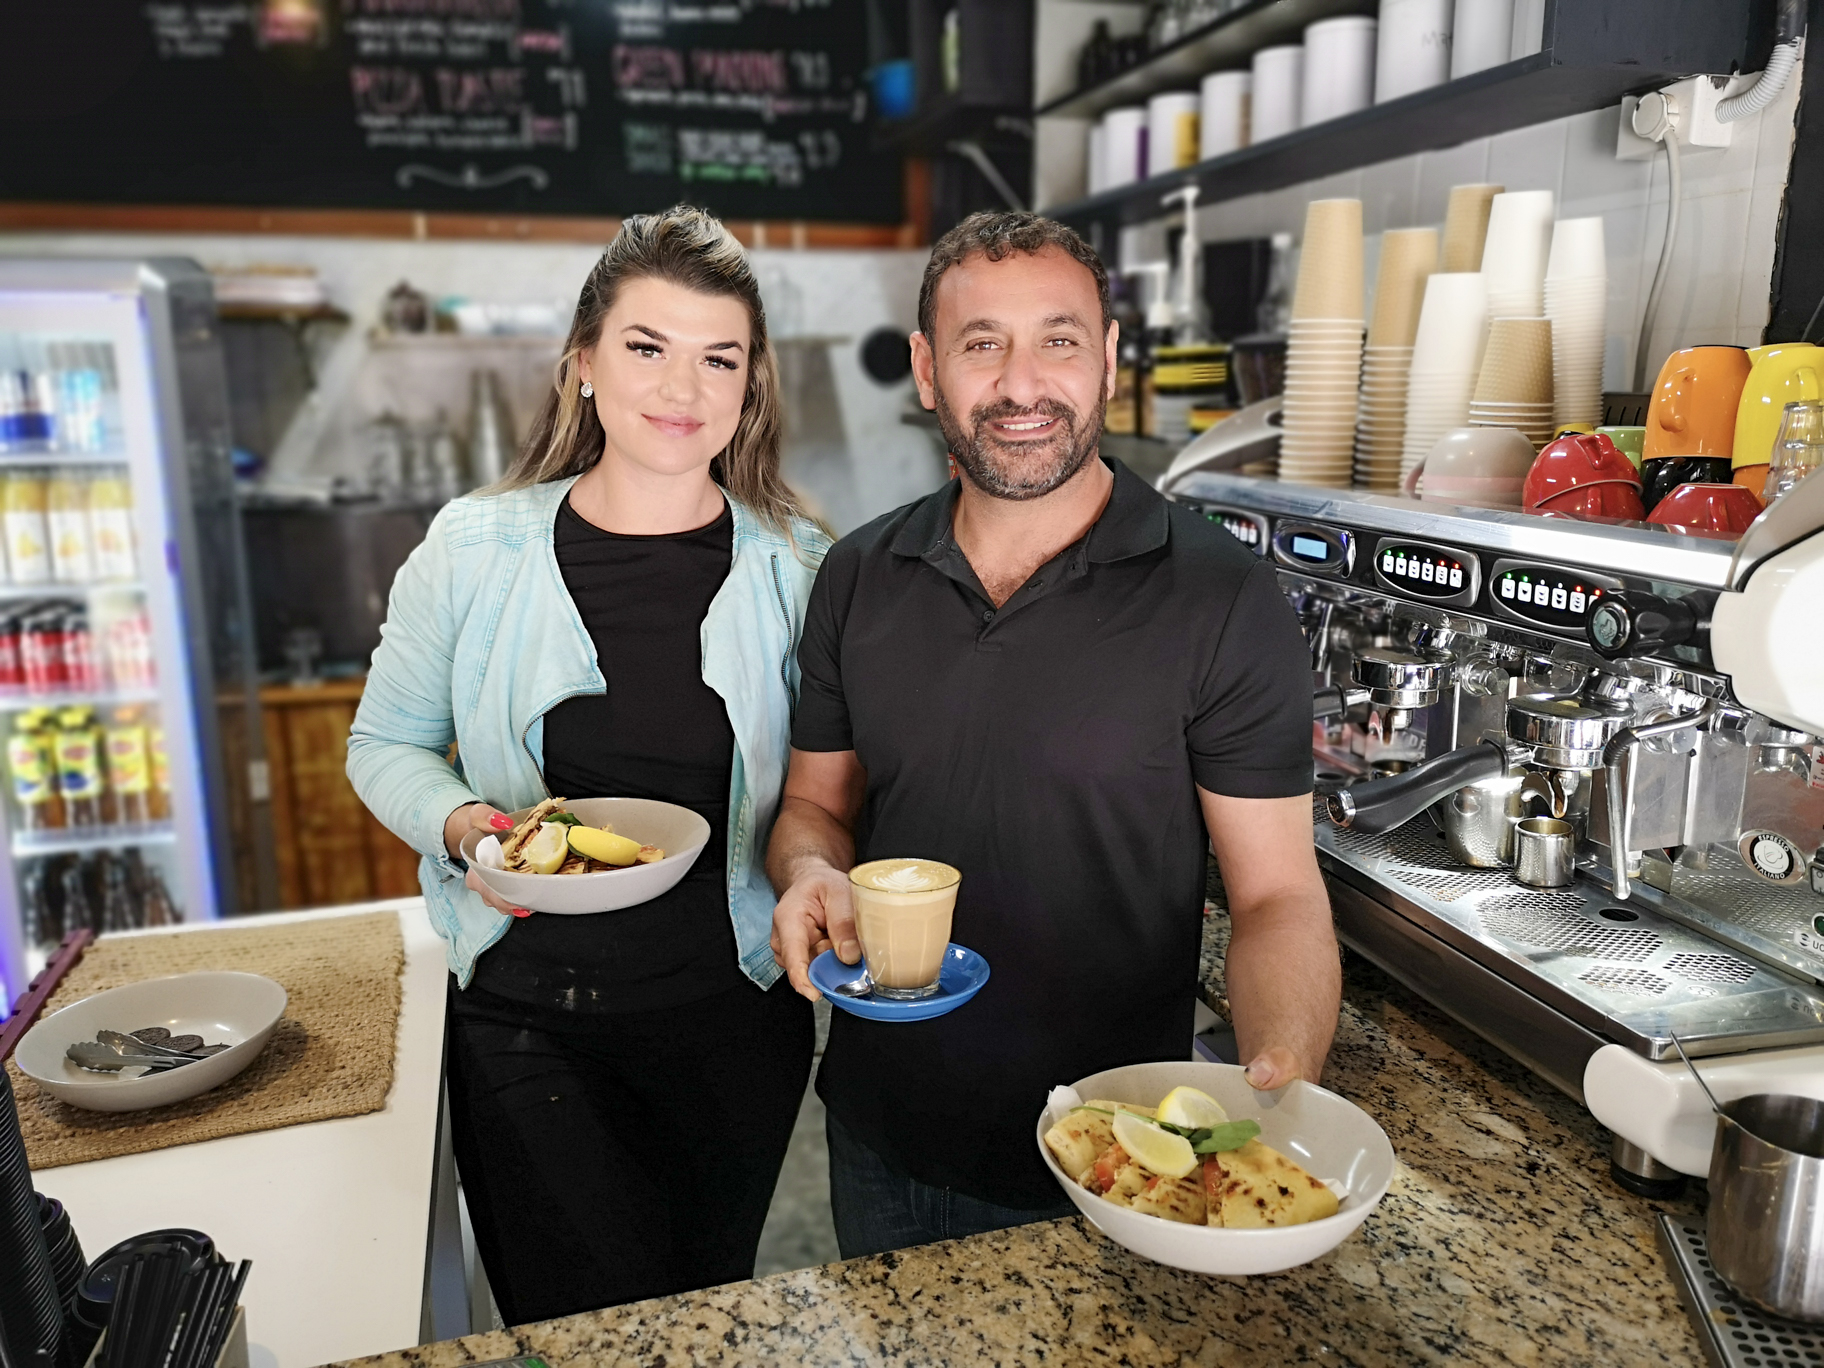 Lady and man holding plates of food in a cafe